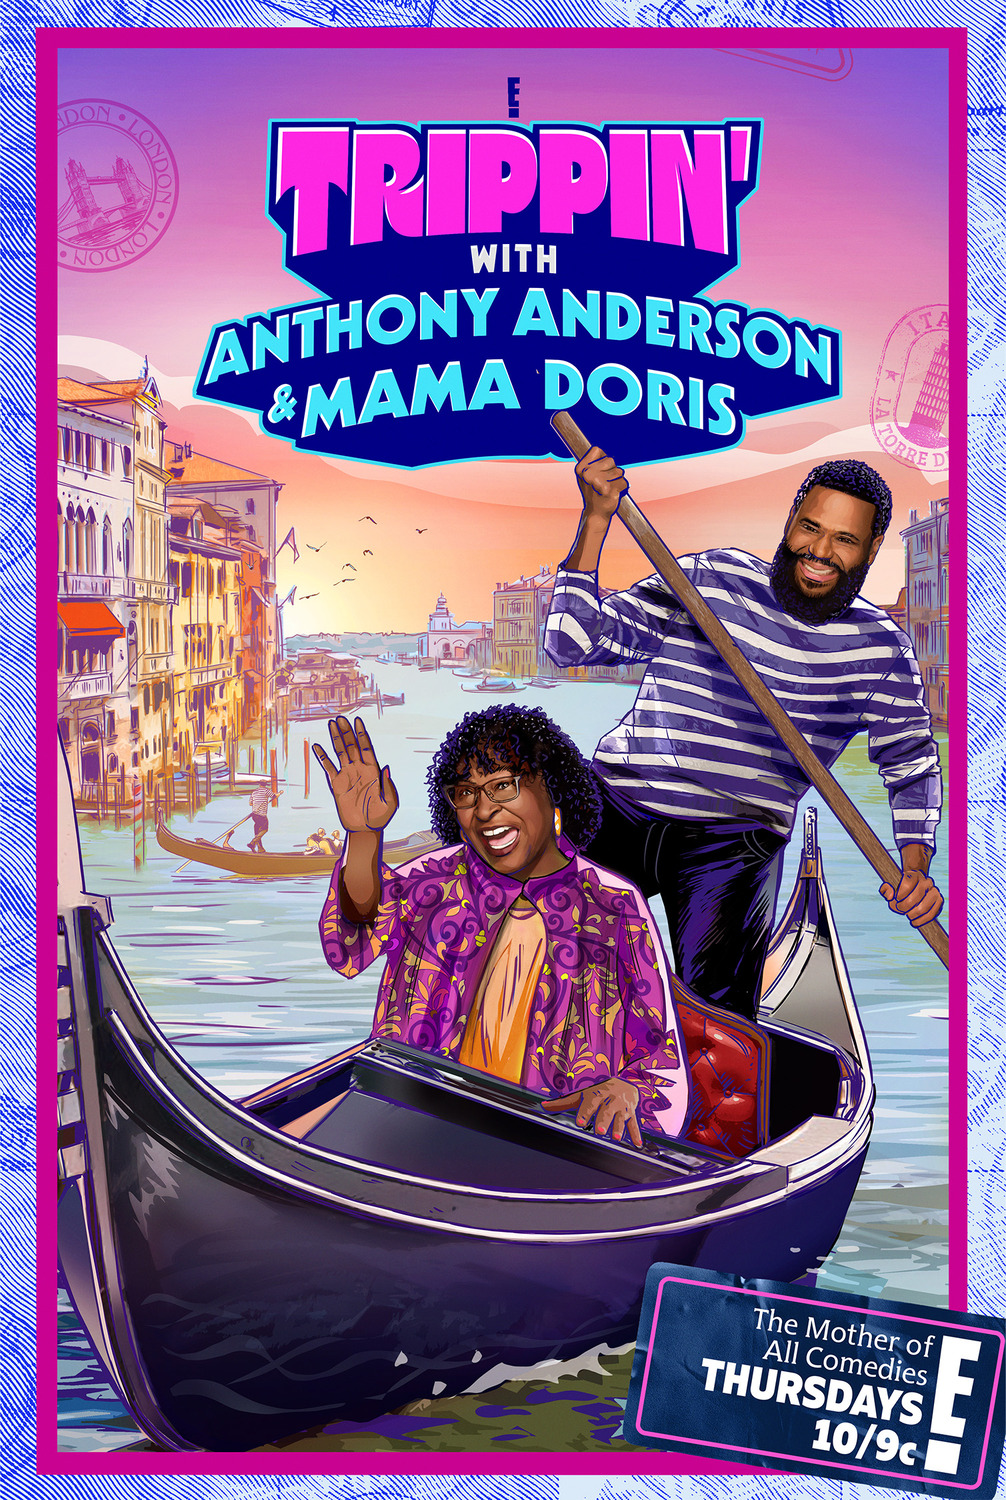 Extra Large TV Poster Image for Trippin' with Anthony Anderson and Mama Doris (#4 of 5)